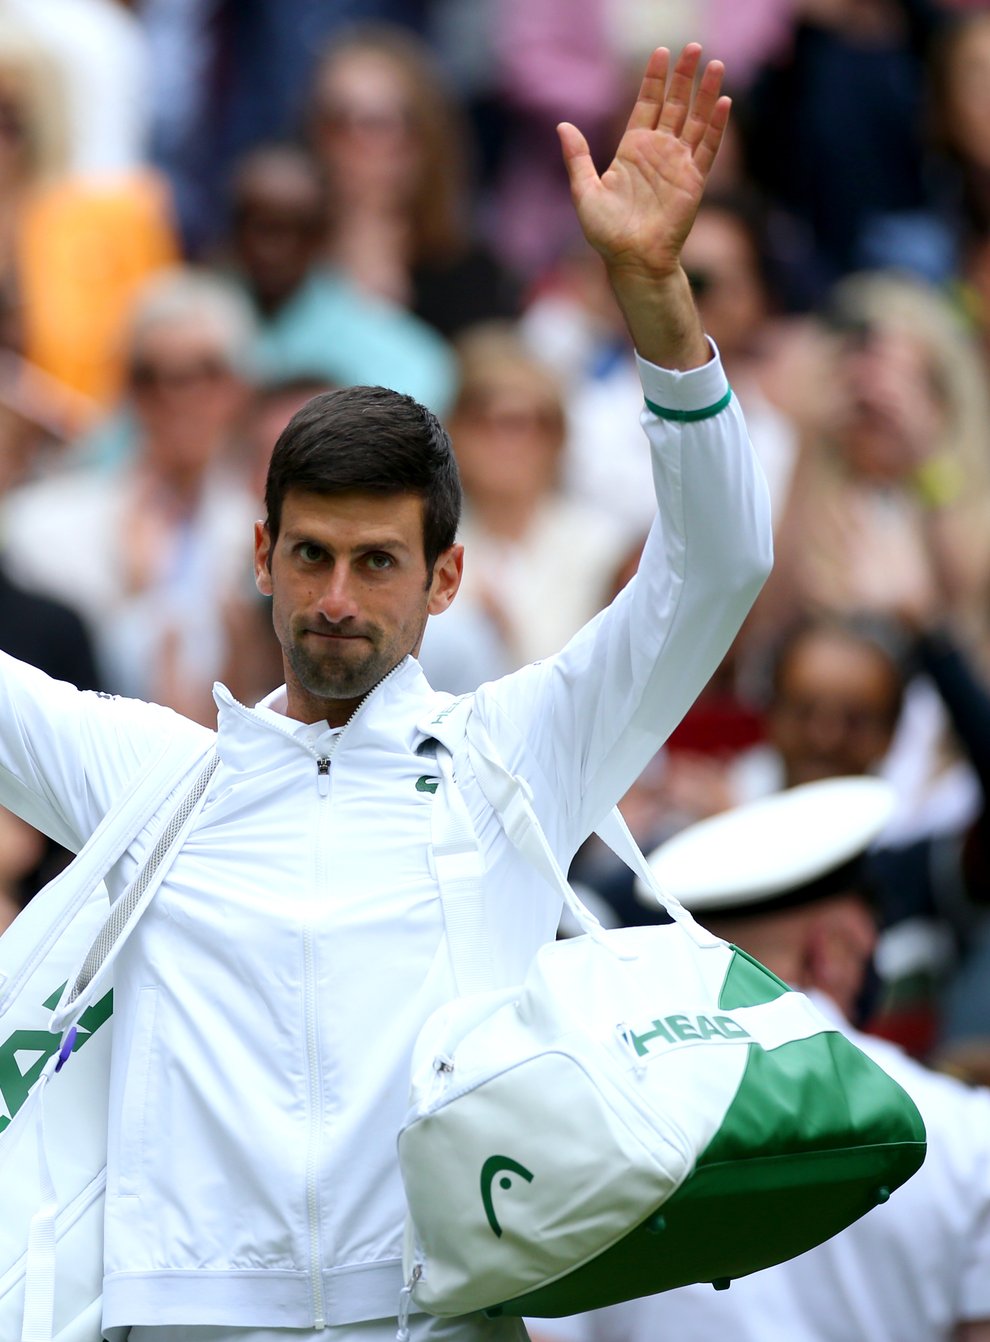 Novak Djokovic was joined in the third round by former Wimbledon champion Andy Murray